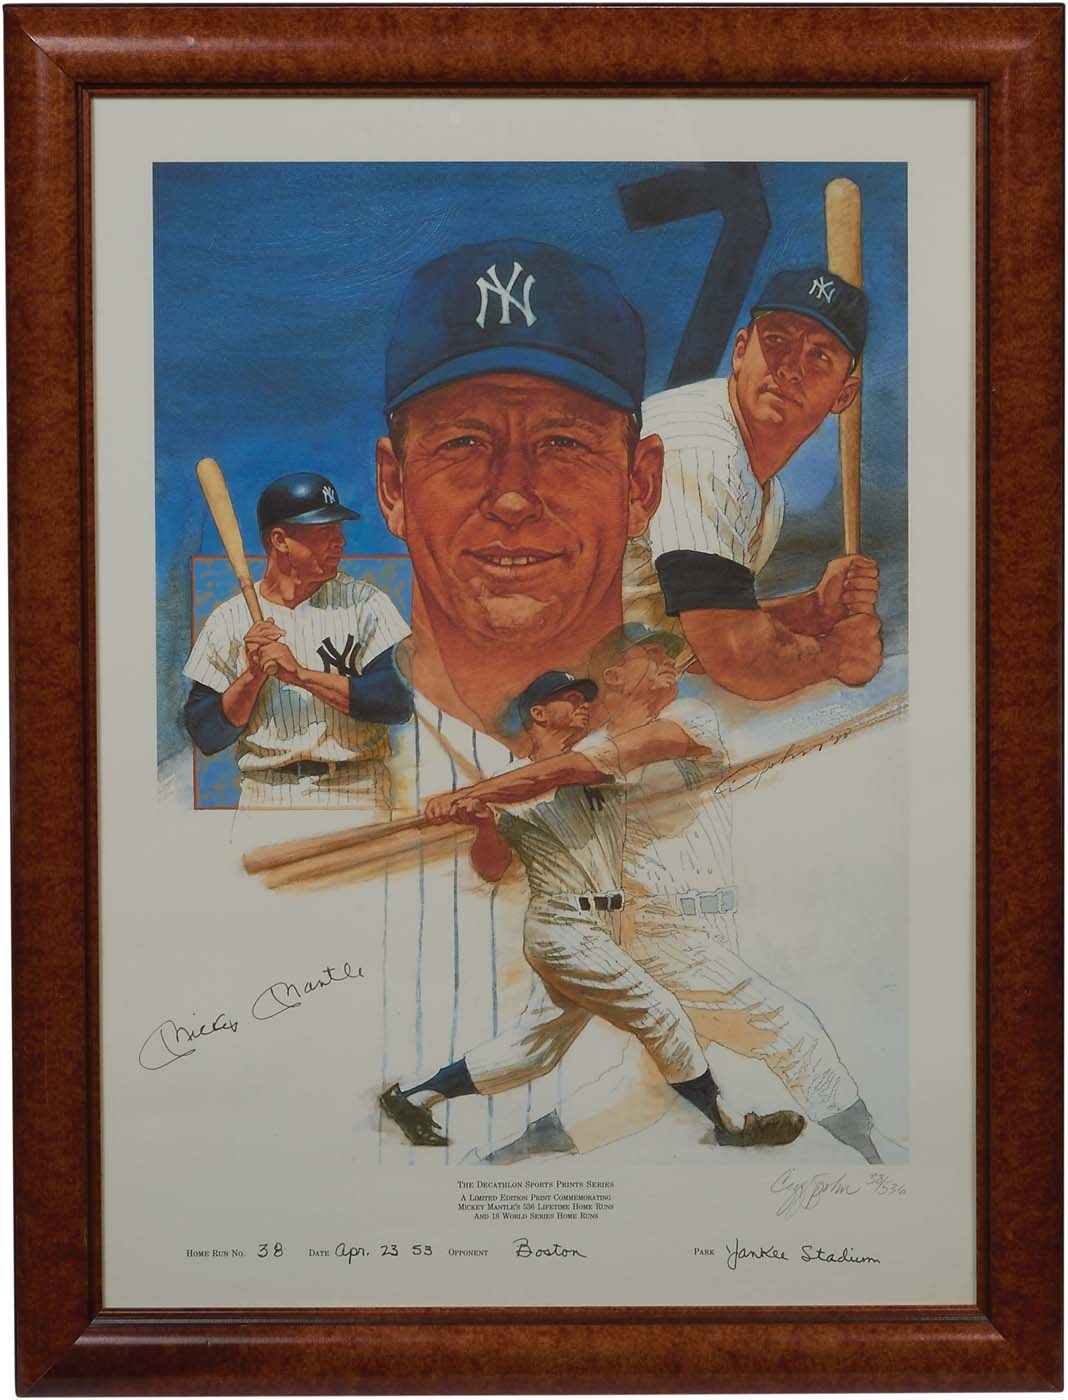 - Mickey Mantle Signed "Home Run 38" Limited Edition Print (JSA)